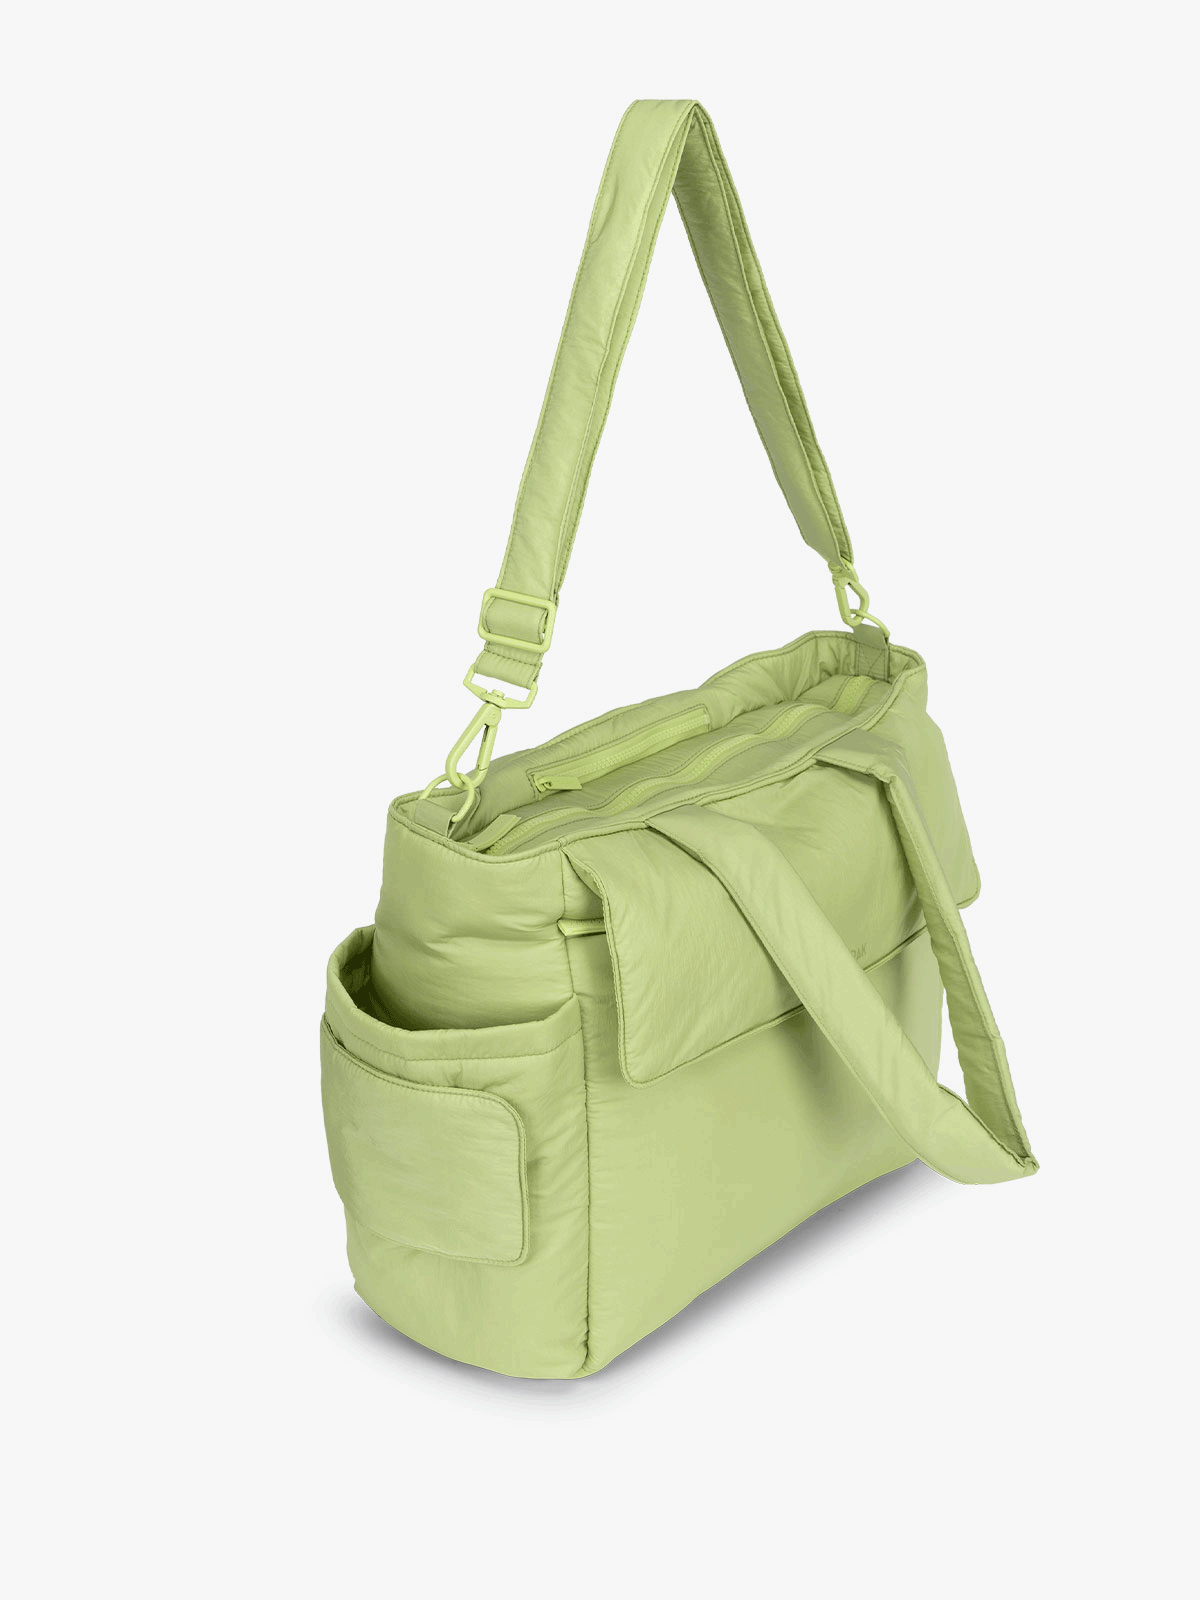 CALPAK diaper tote bag with baby wipe compartment in green